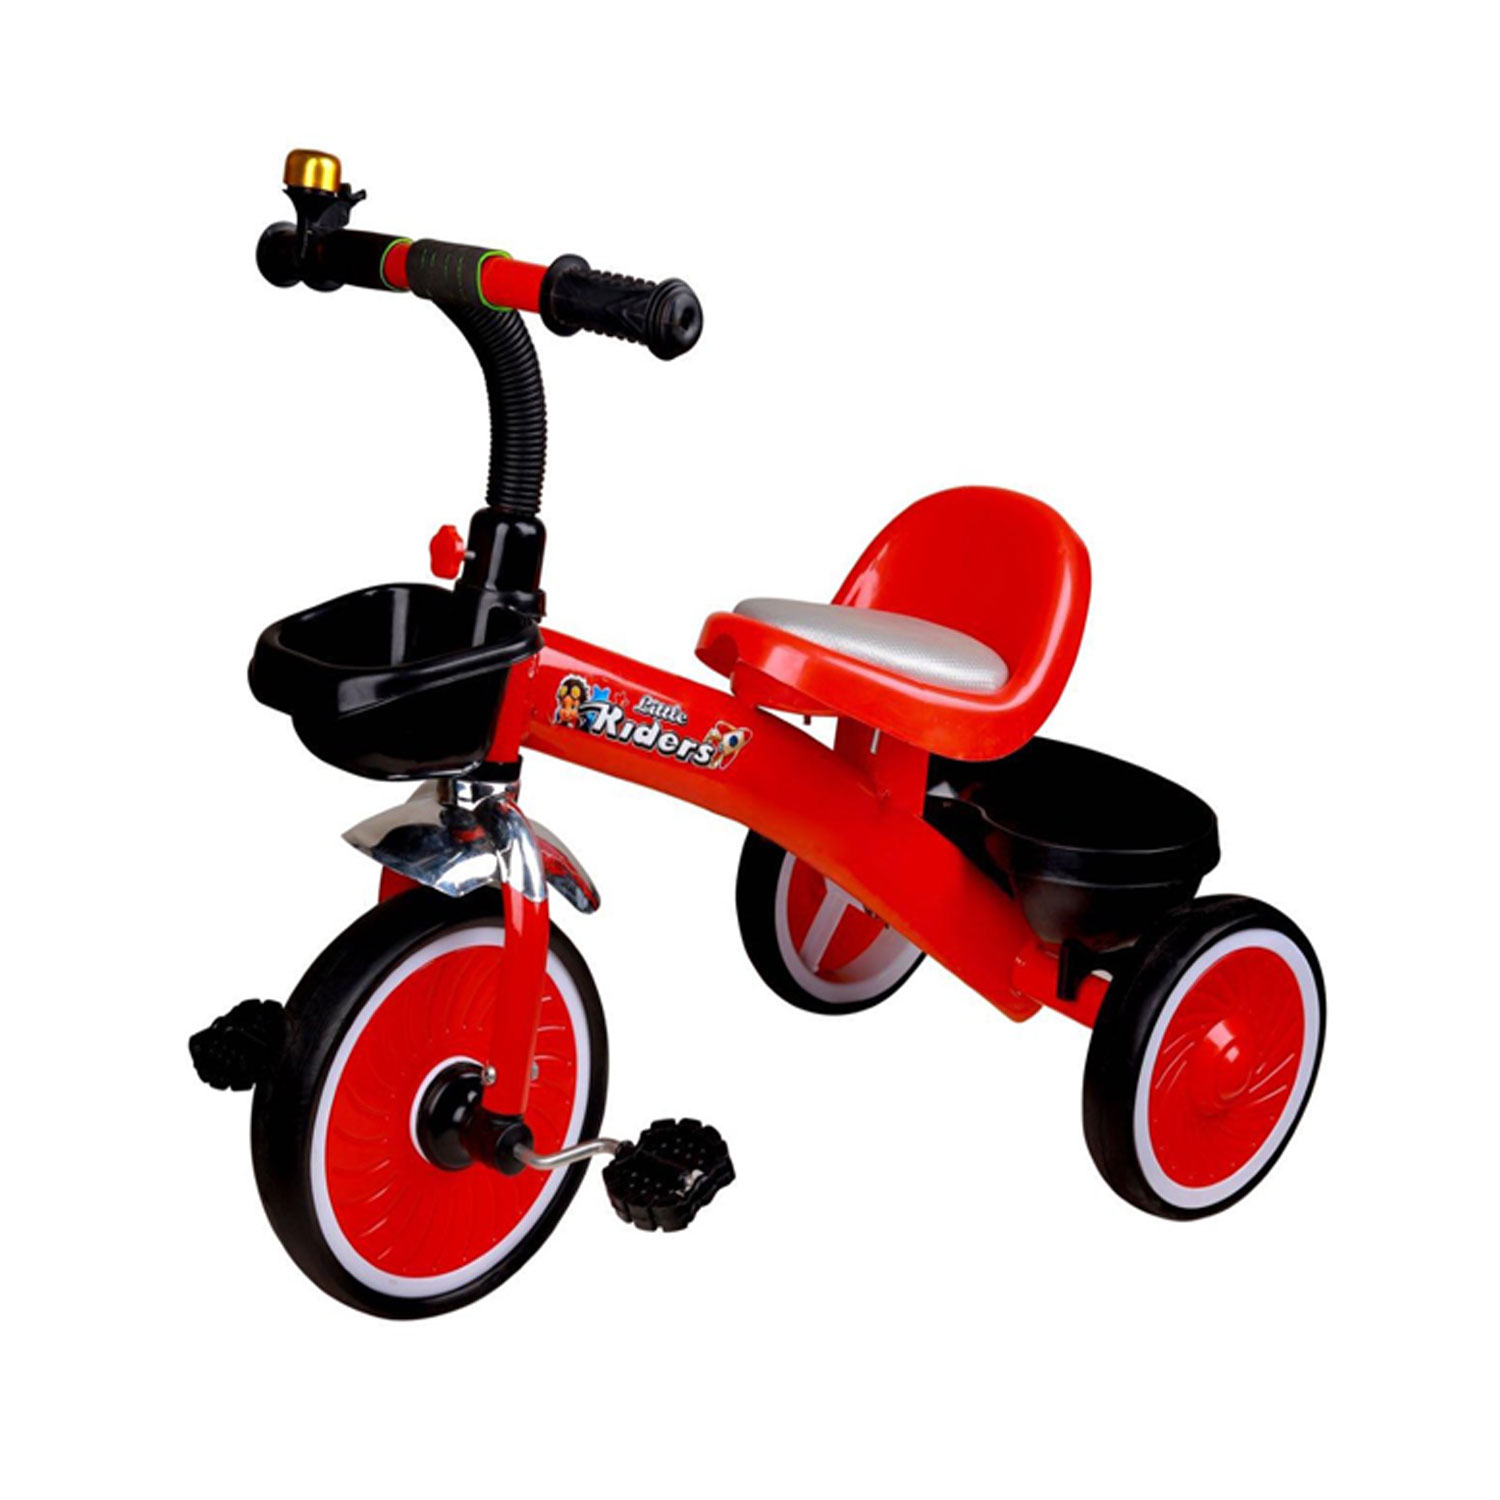 NAVRANGI BABY TRICYCLE FOR KIDS WITH FRONT OR BACK BASKET AND PARENT HANDLE. TRICYCLE FOR KIDS KBQ-171 